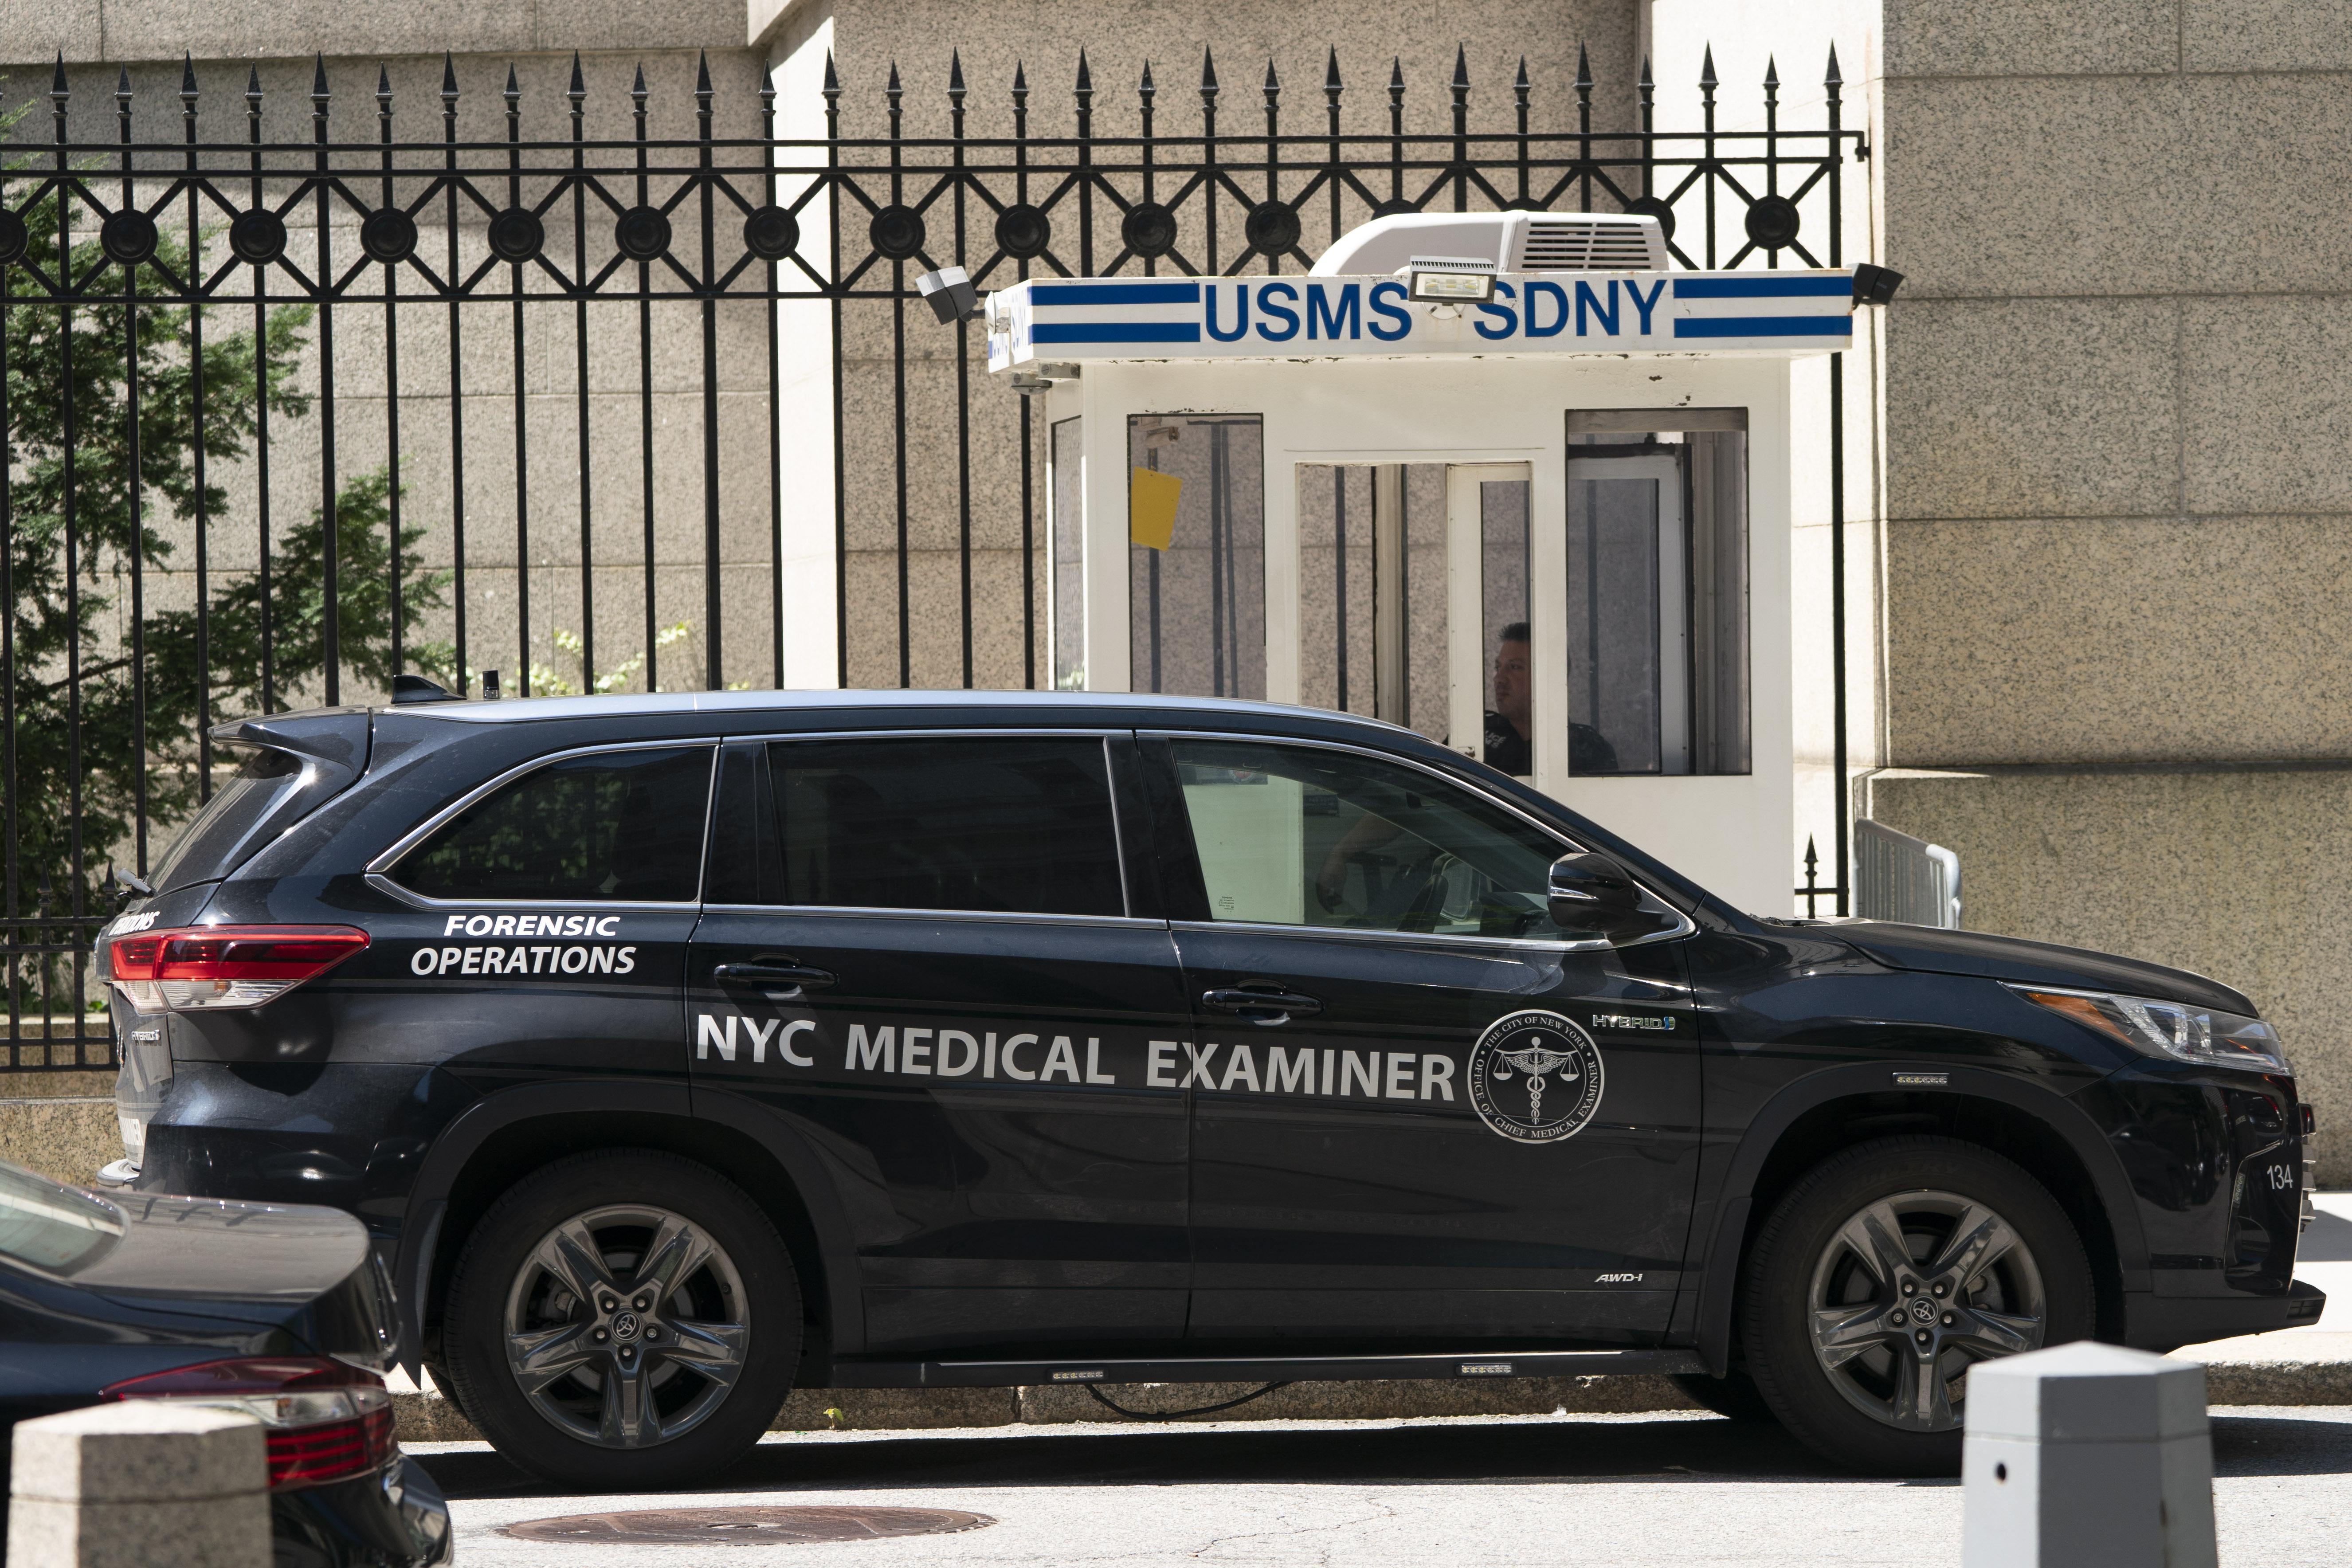 A New York Medical Examiner's car is parked outside the Metropolitan Correctional Center where financier Jeffrey Epstein was being held, on August 10, 2019, in New York.